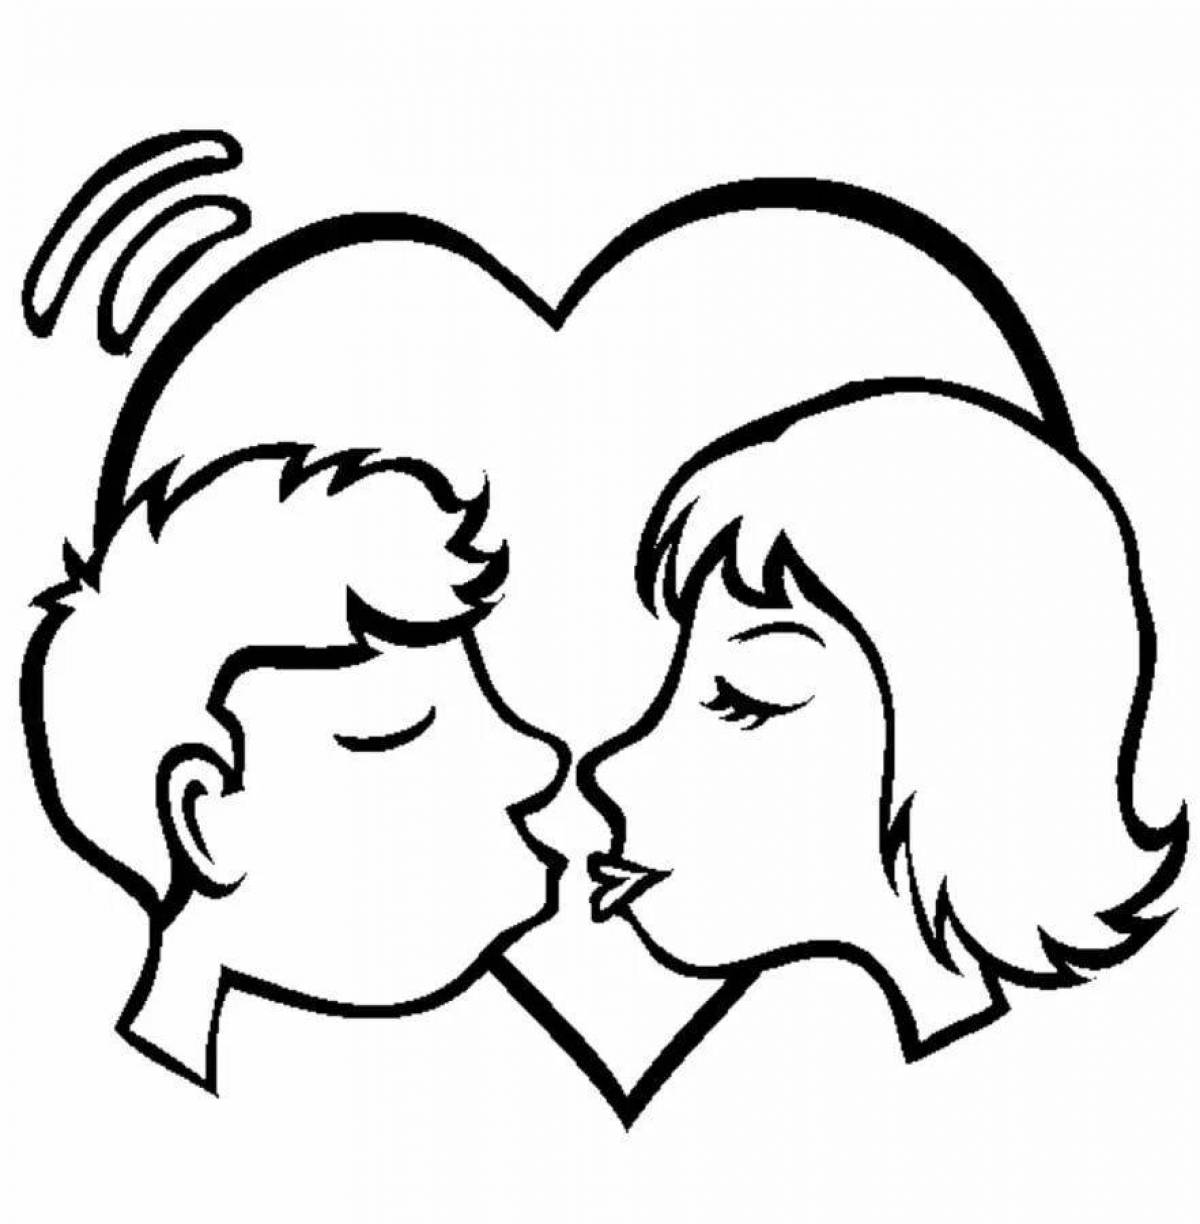 Exciting kiss coloring page